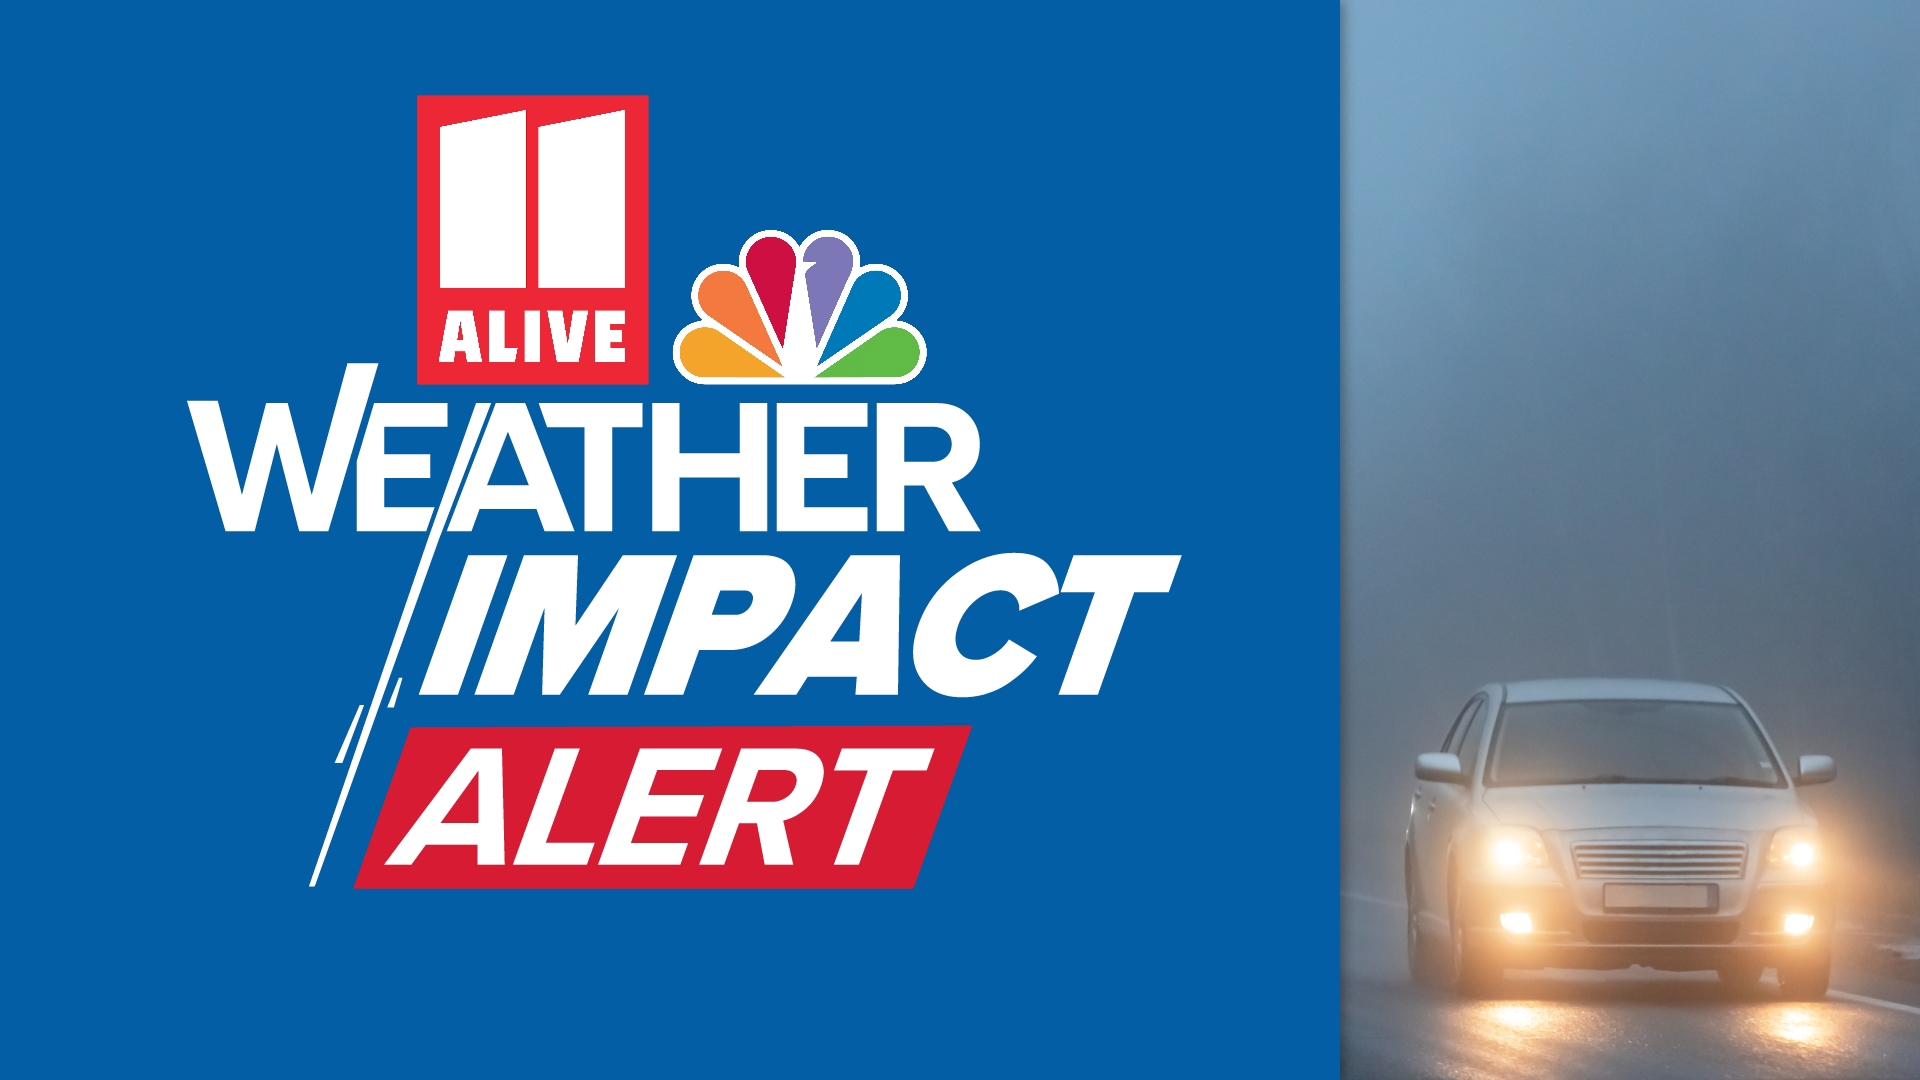 Here's a look at the criteria for an 11Alive Weather Impact Alert